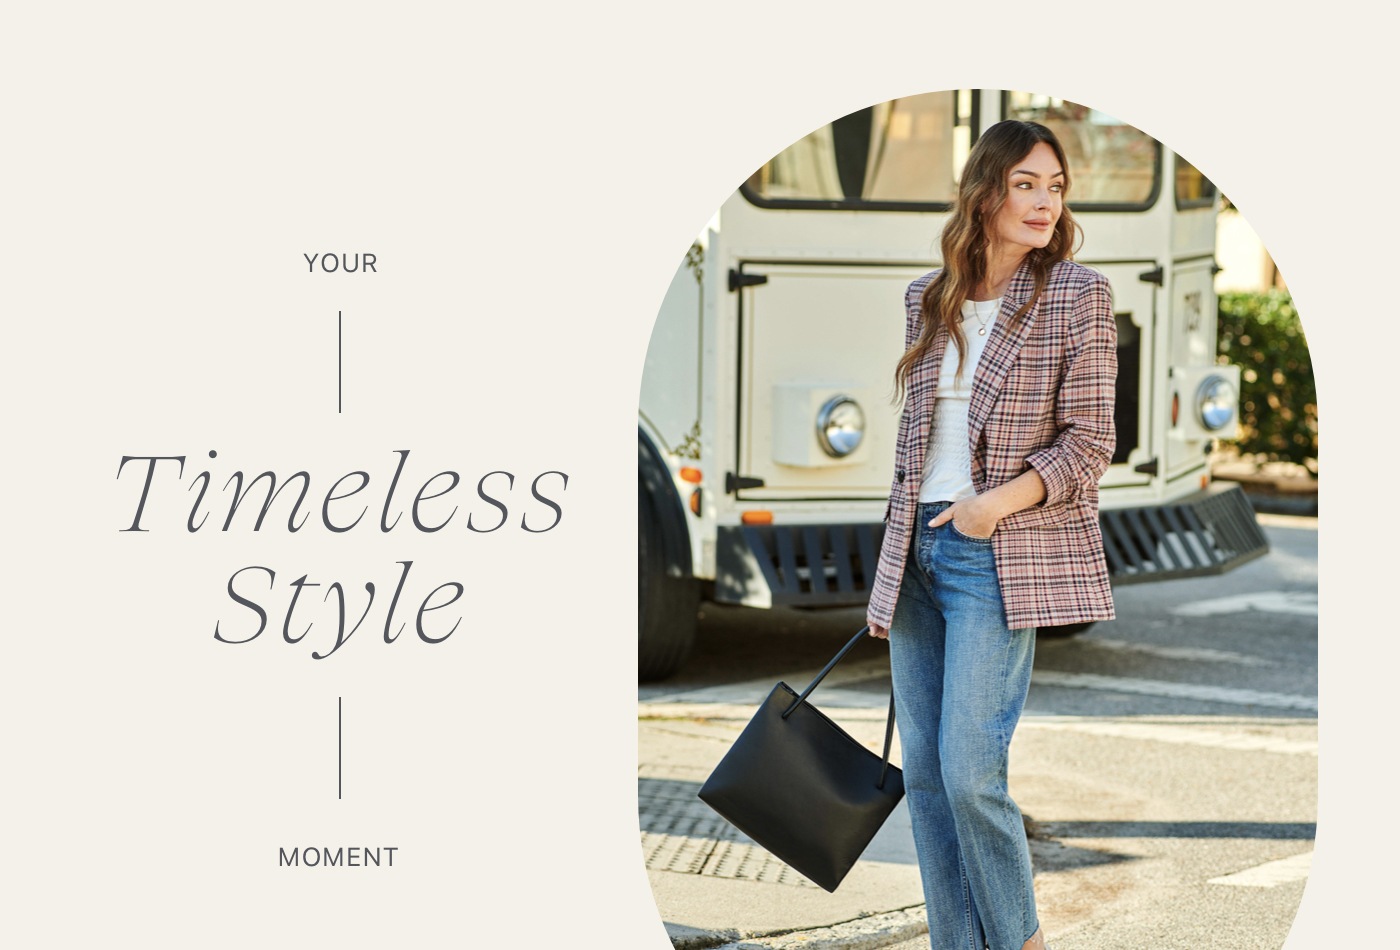 Your timeless style moment